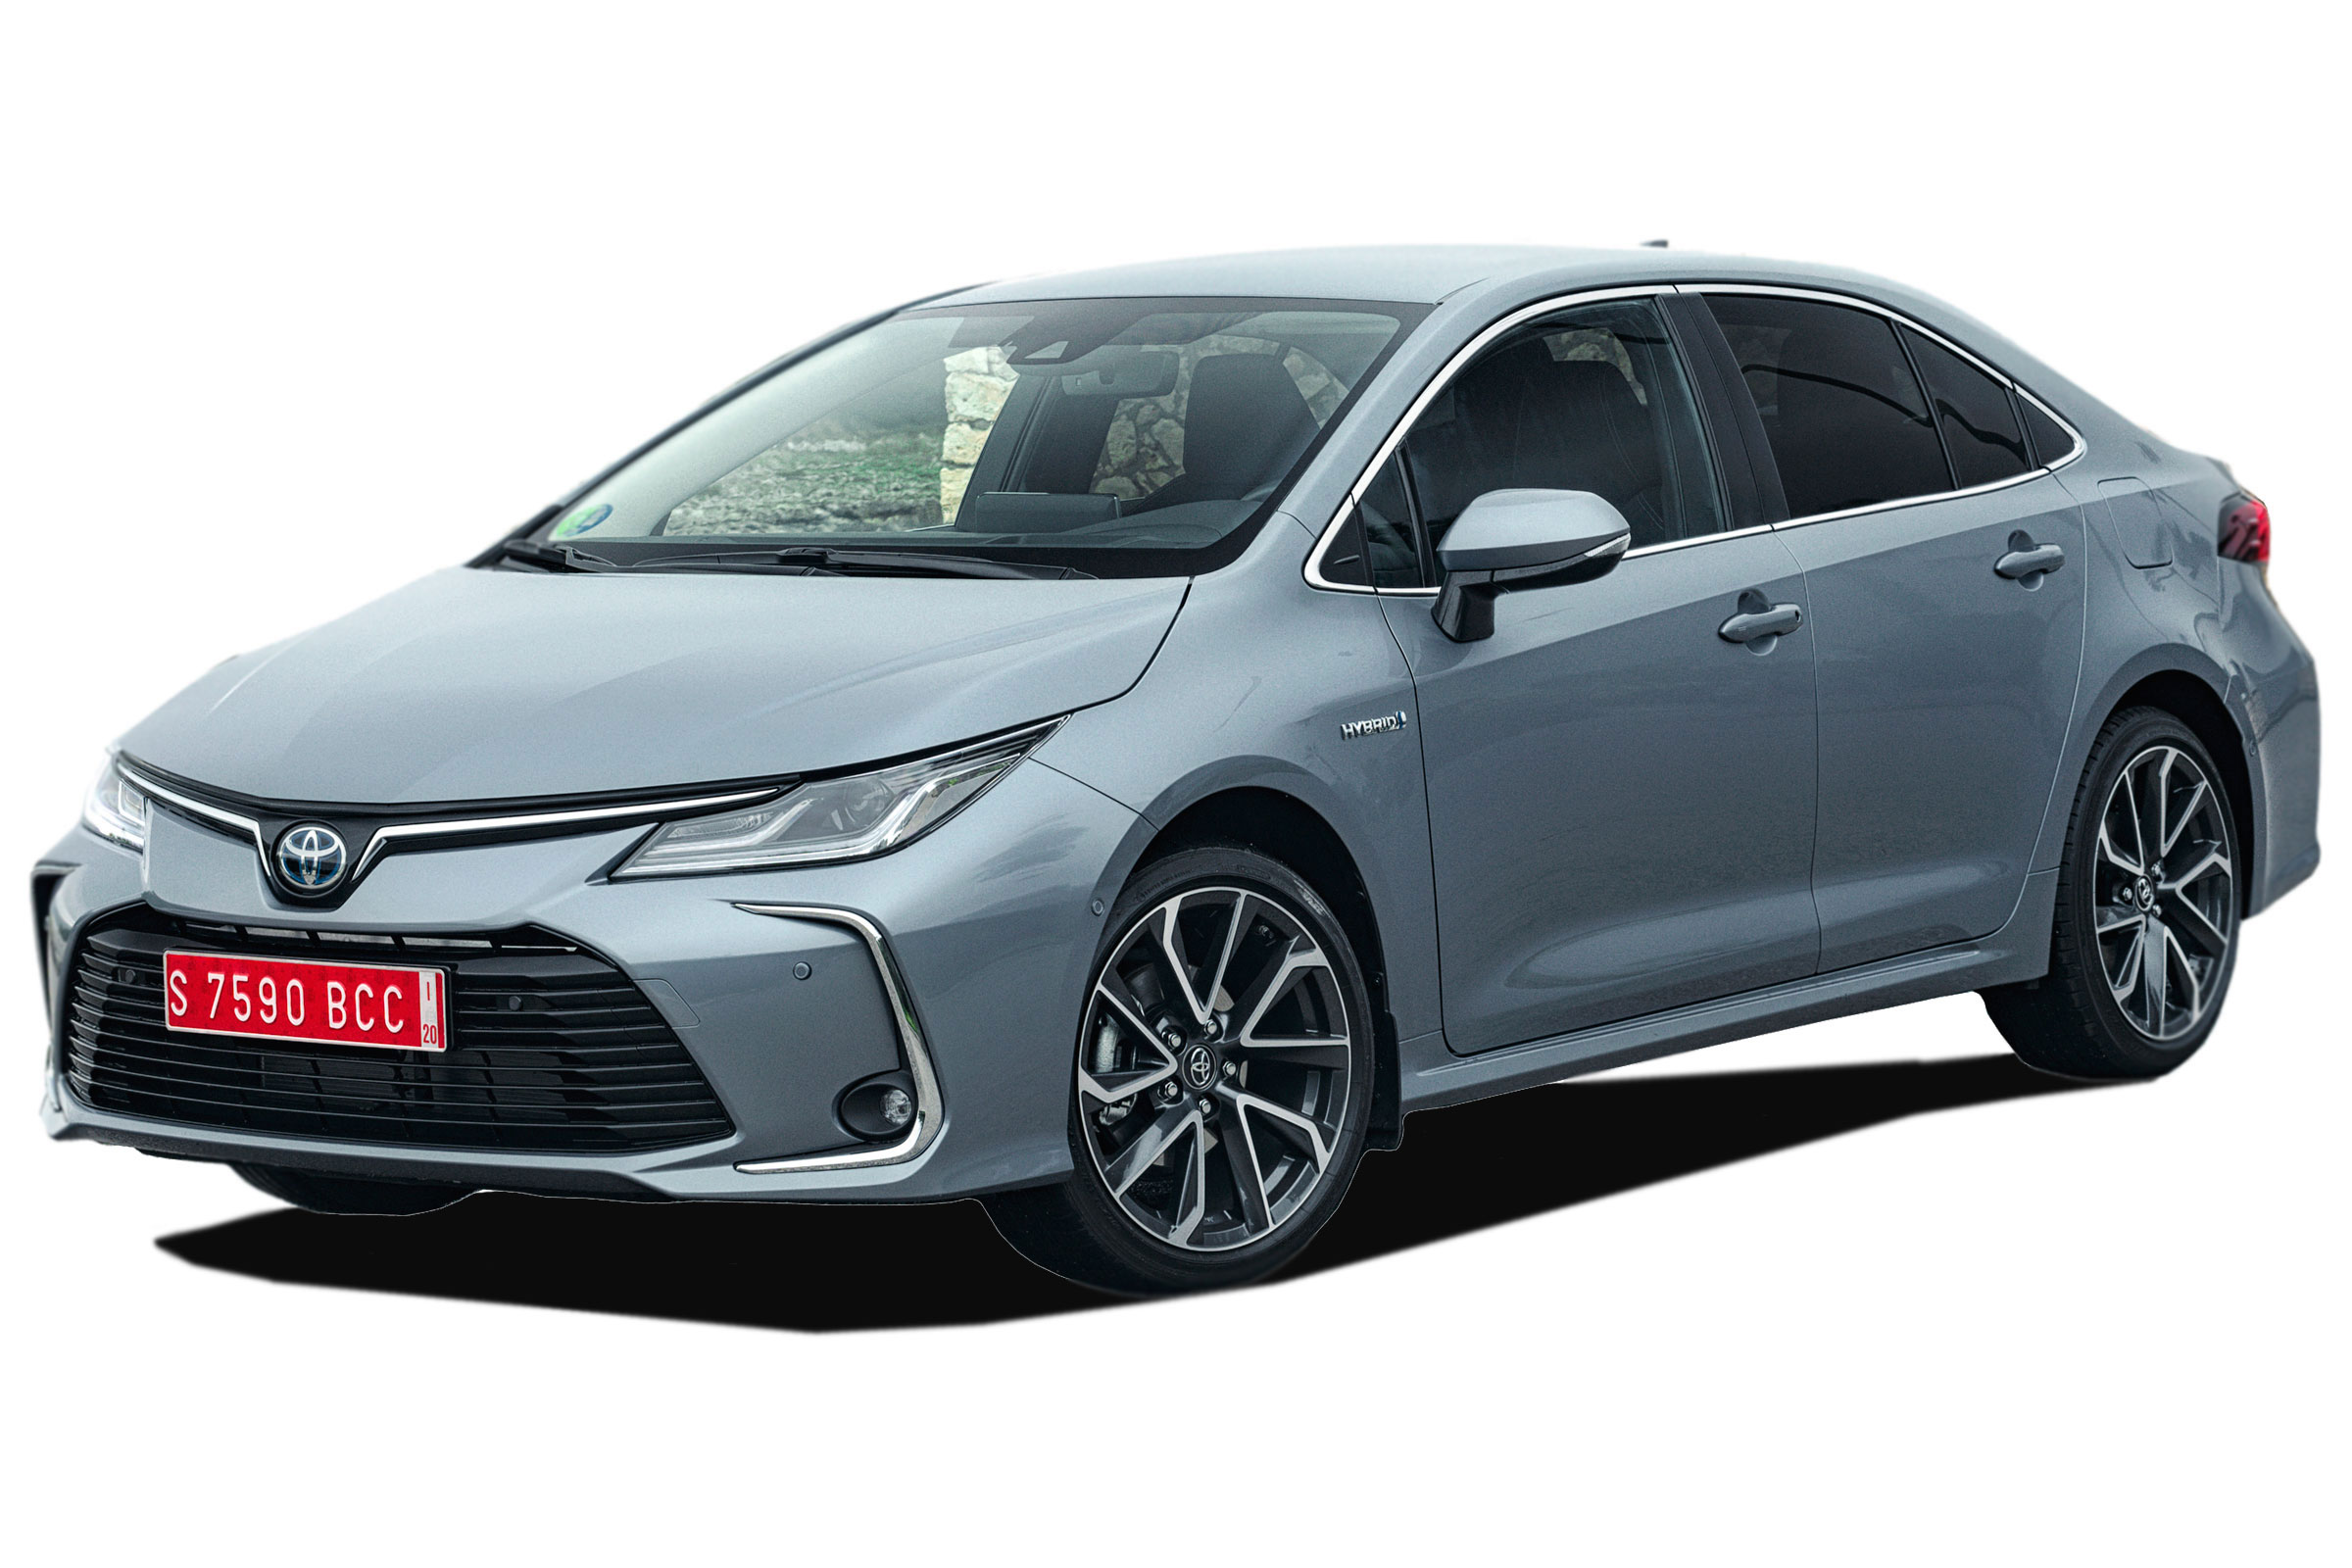  Toyota Corolla  saloon 2022 review Carbuyer